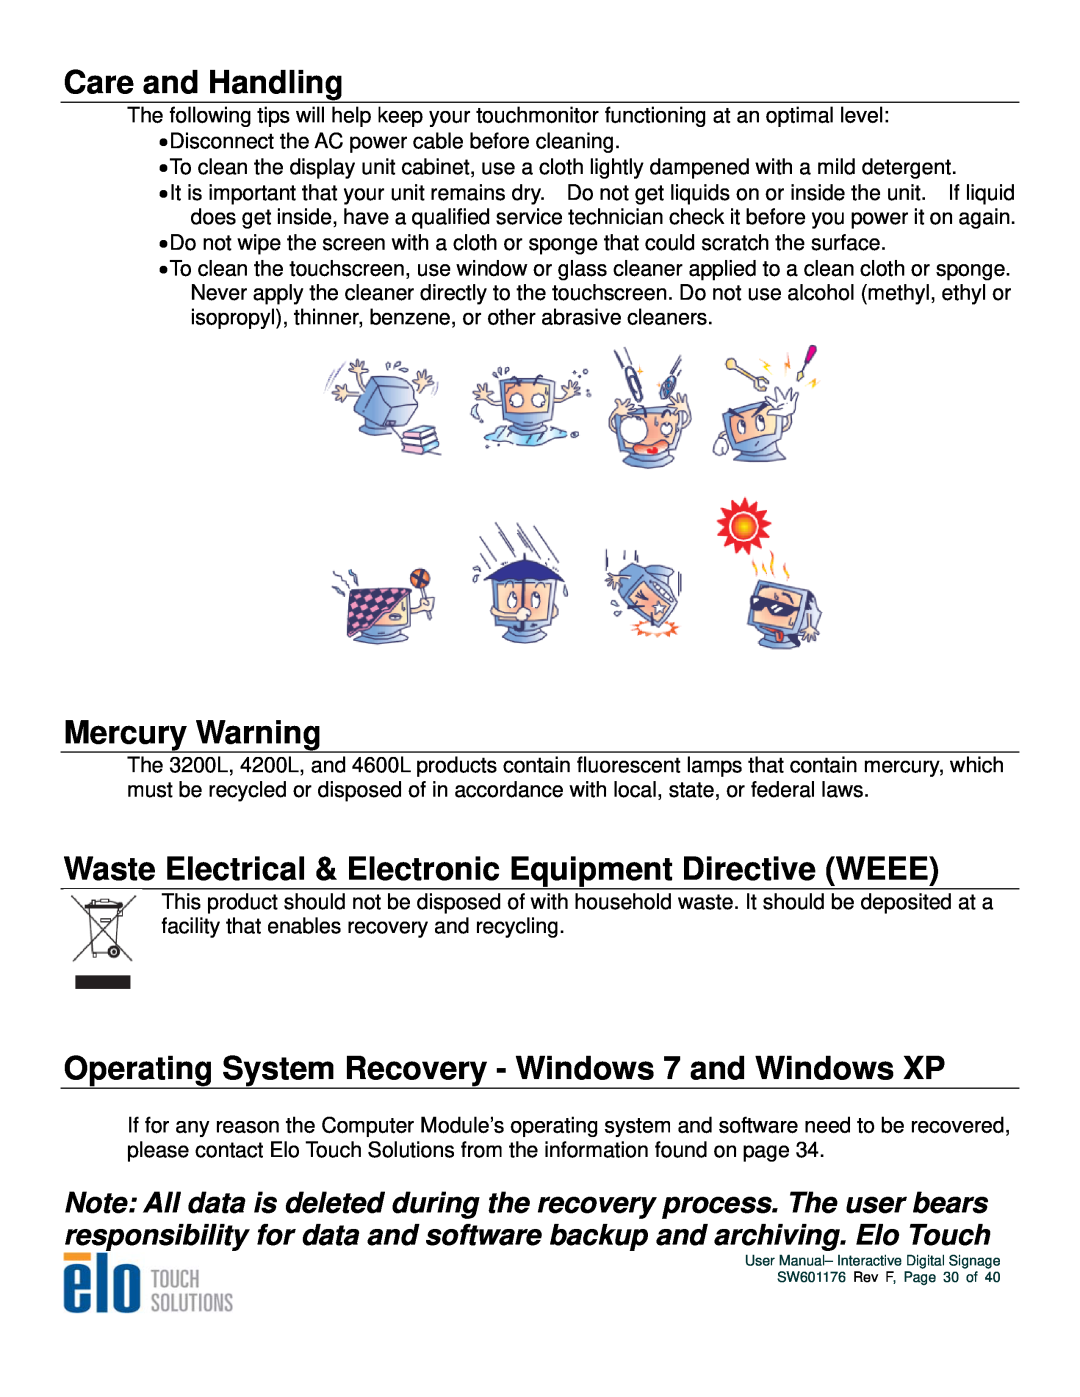 Elo TouchSystems 4200L, 4600L Care and Handling, Mercury Warning, Waste Electrical & Electronic Equipment Directive WEEE 